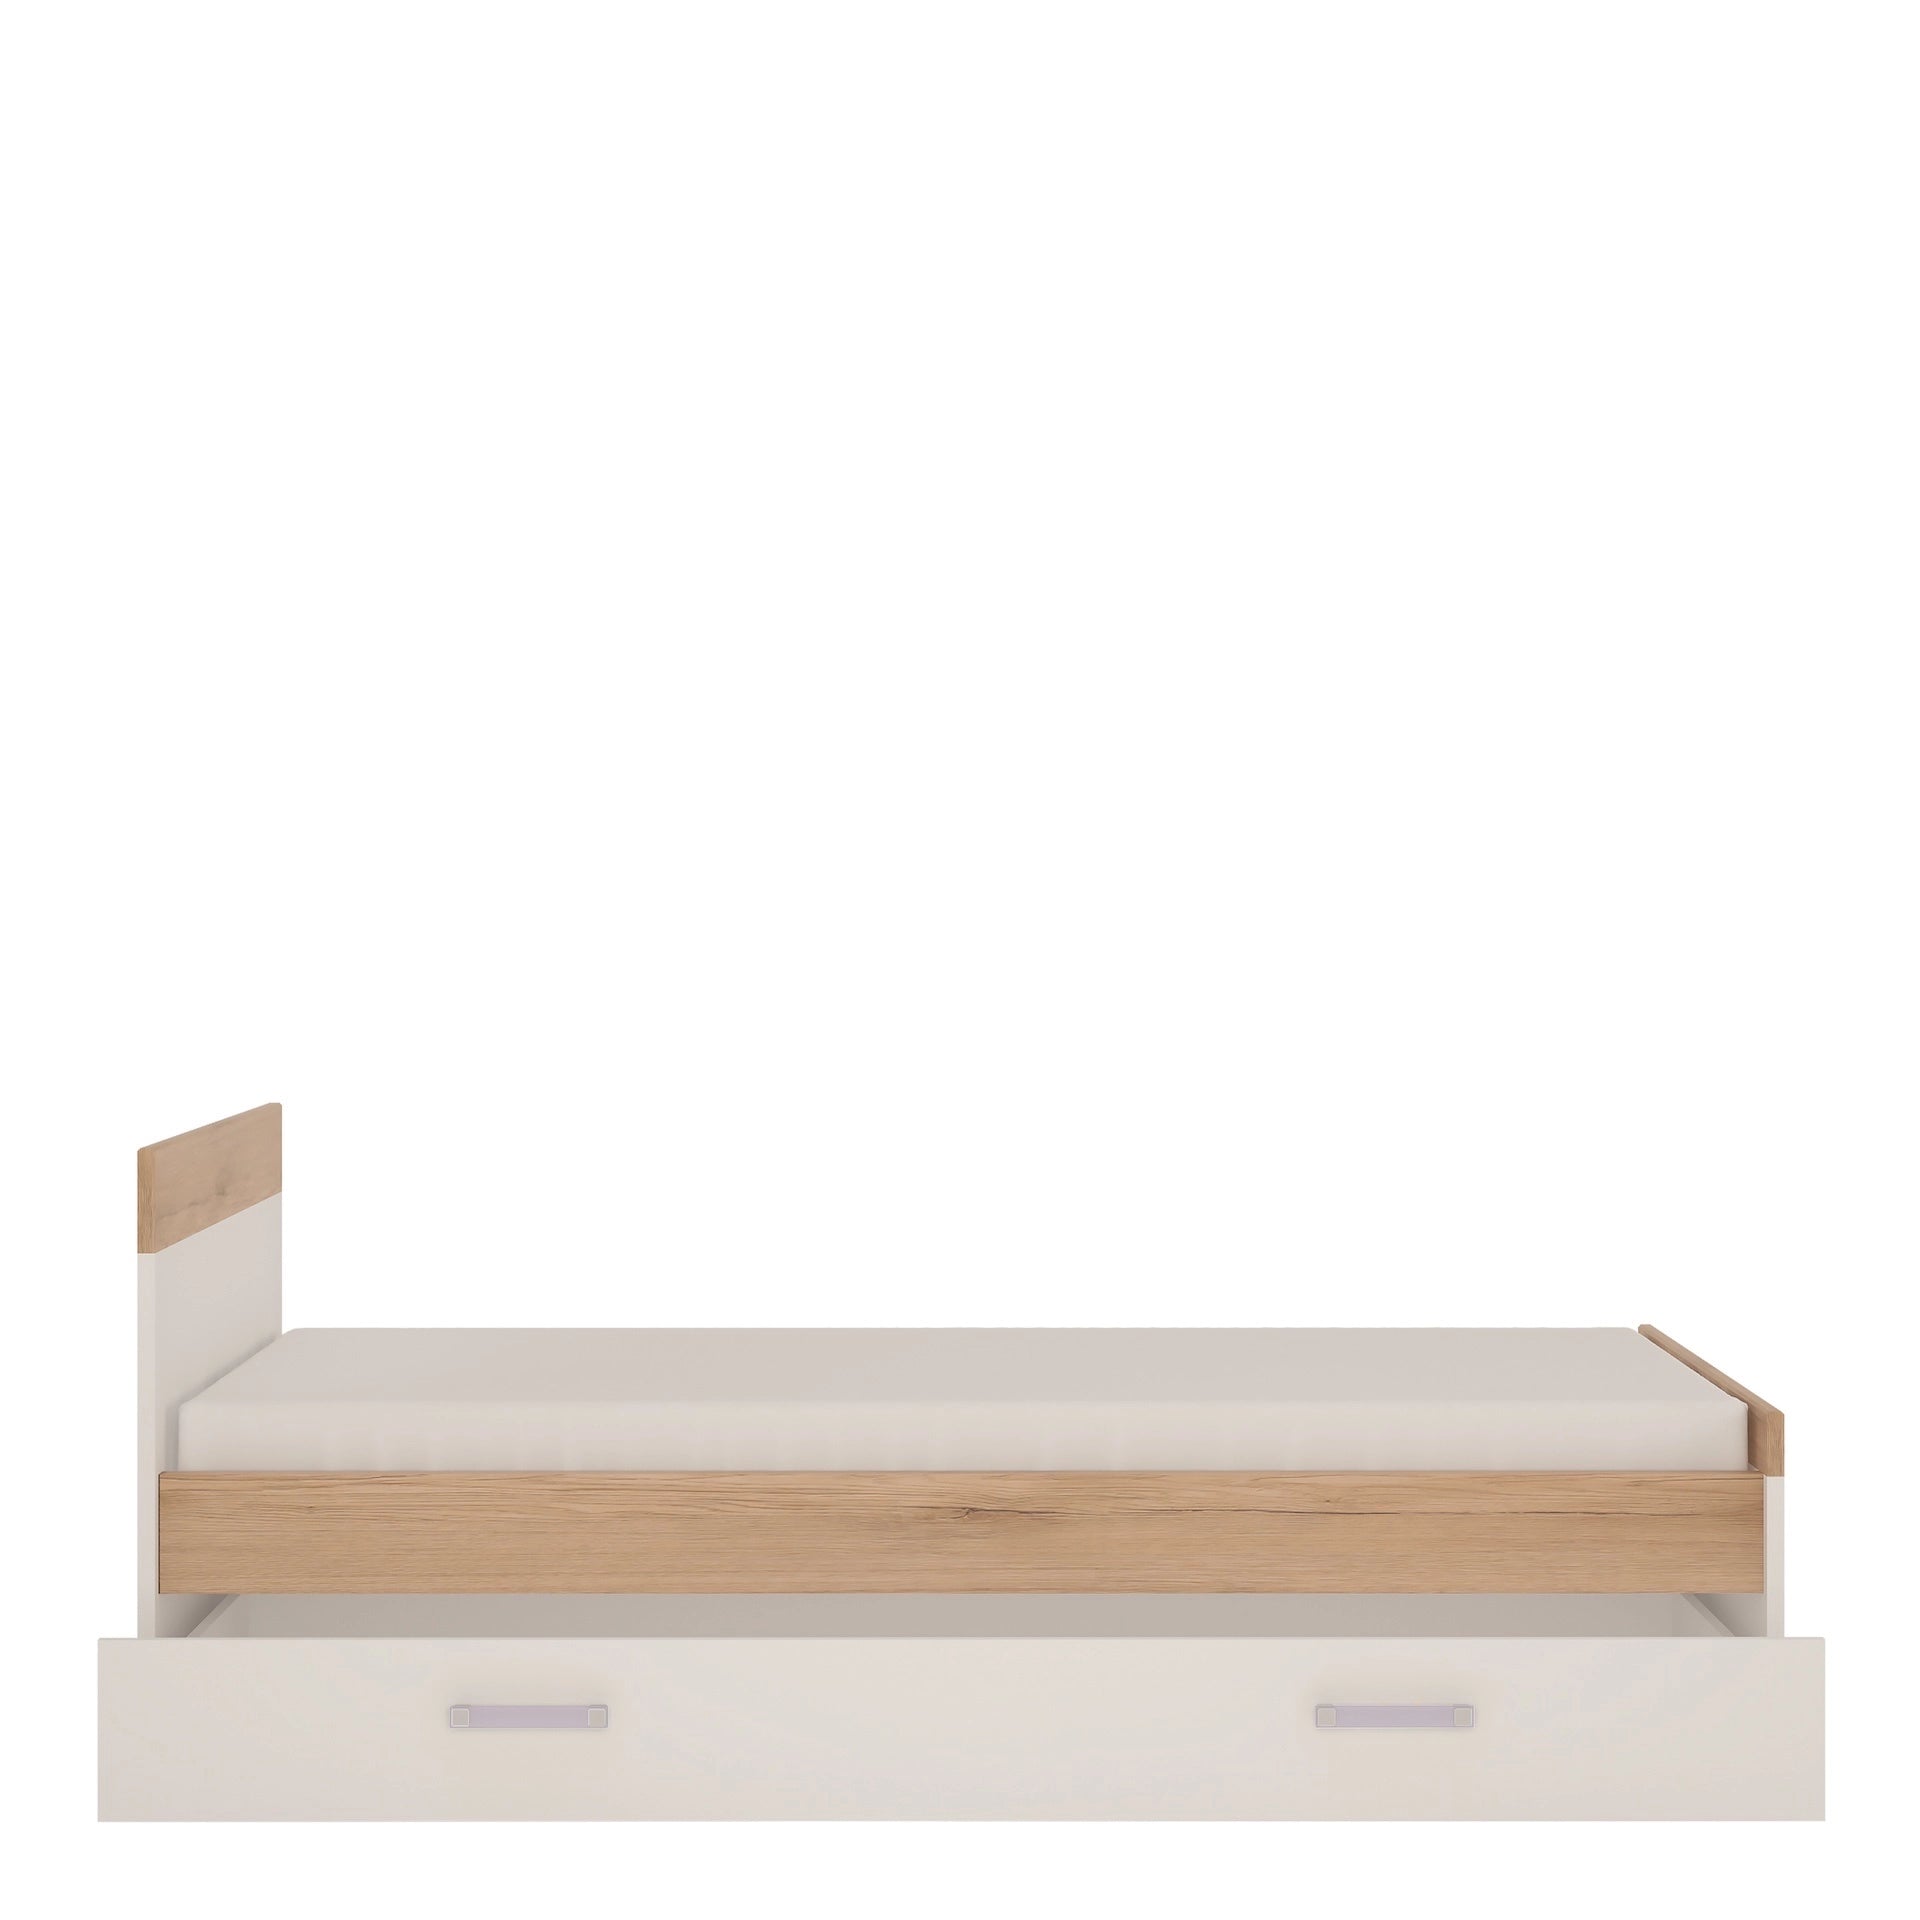 Furniture To Go 4Kids 3ft Single Bed with Under Drawer in Light Oak & White High Gloss (Lilac Handles)